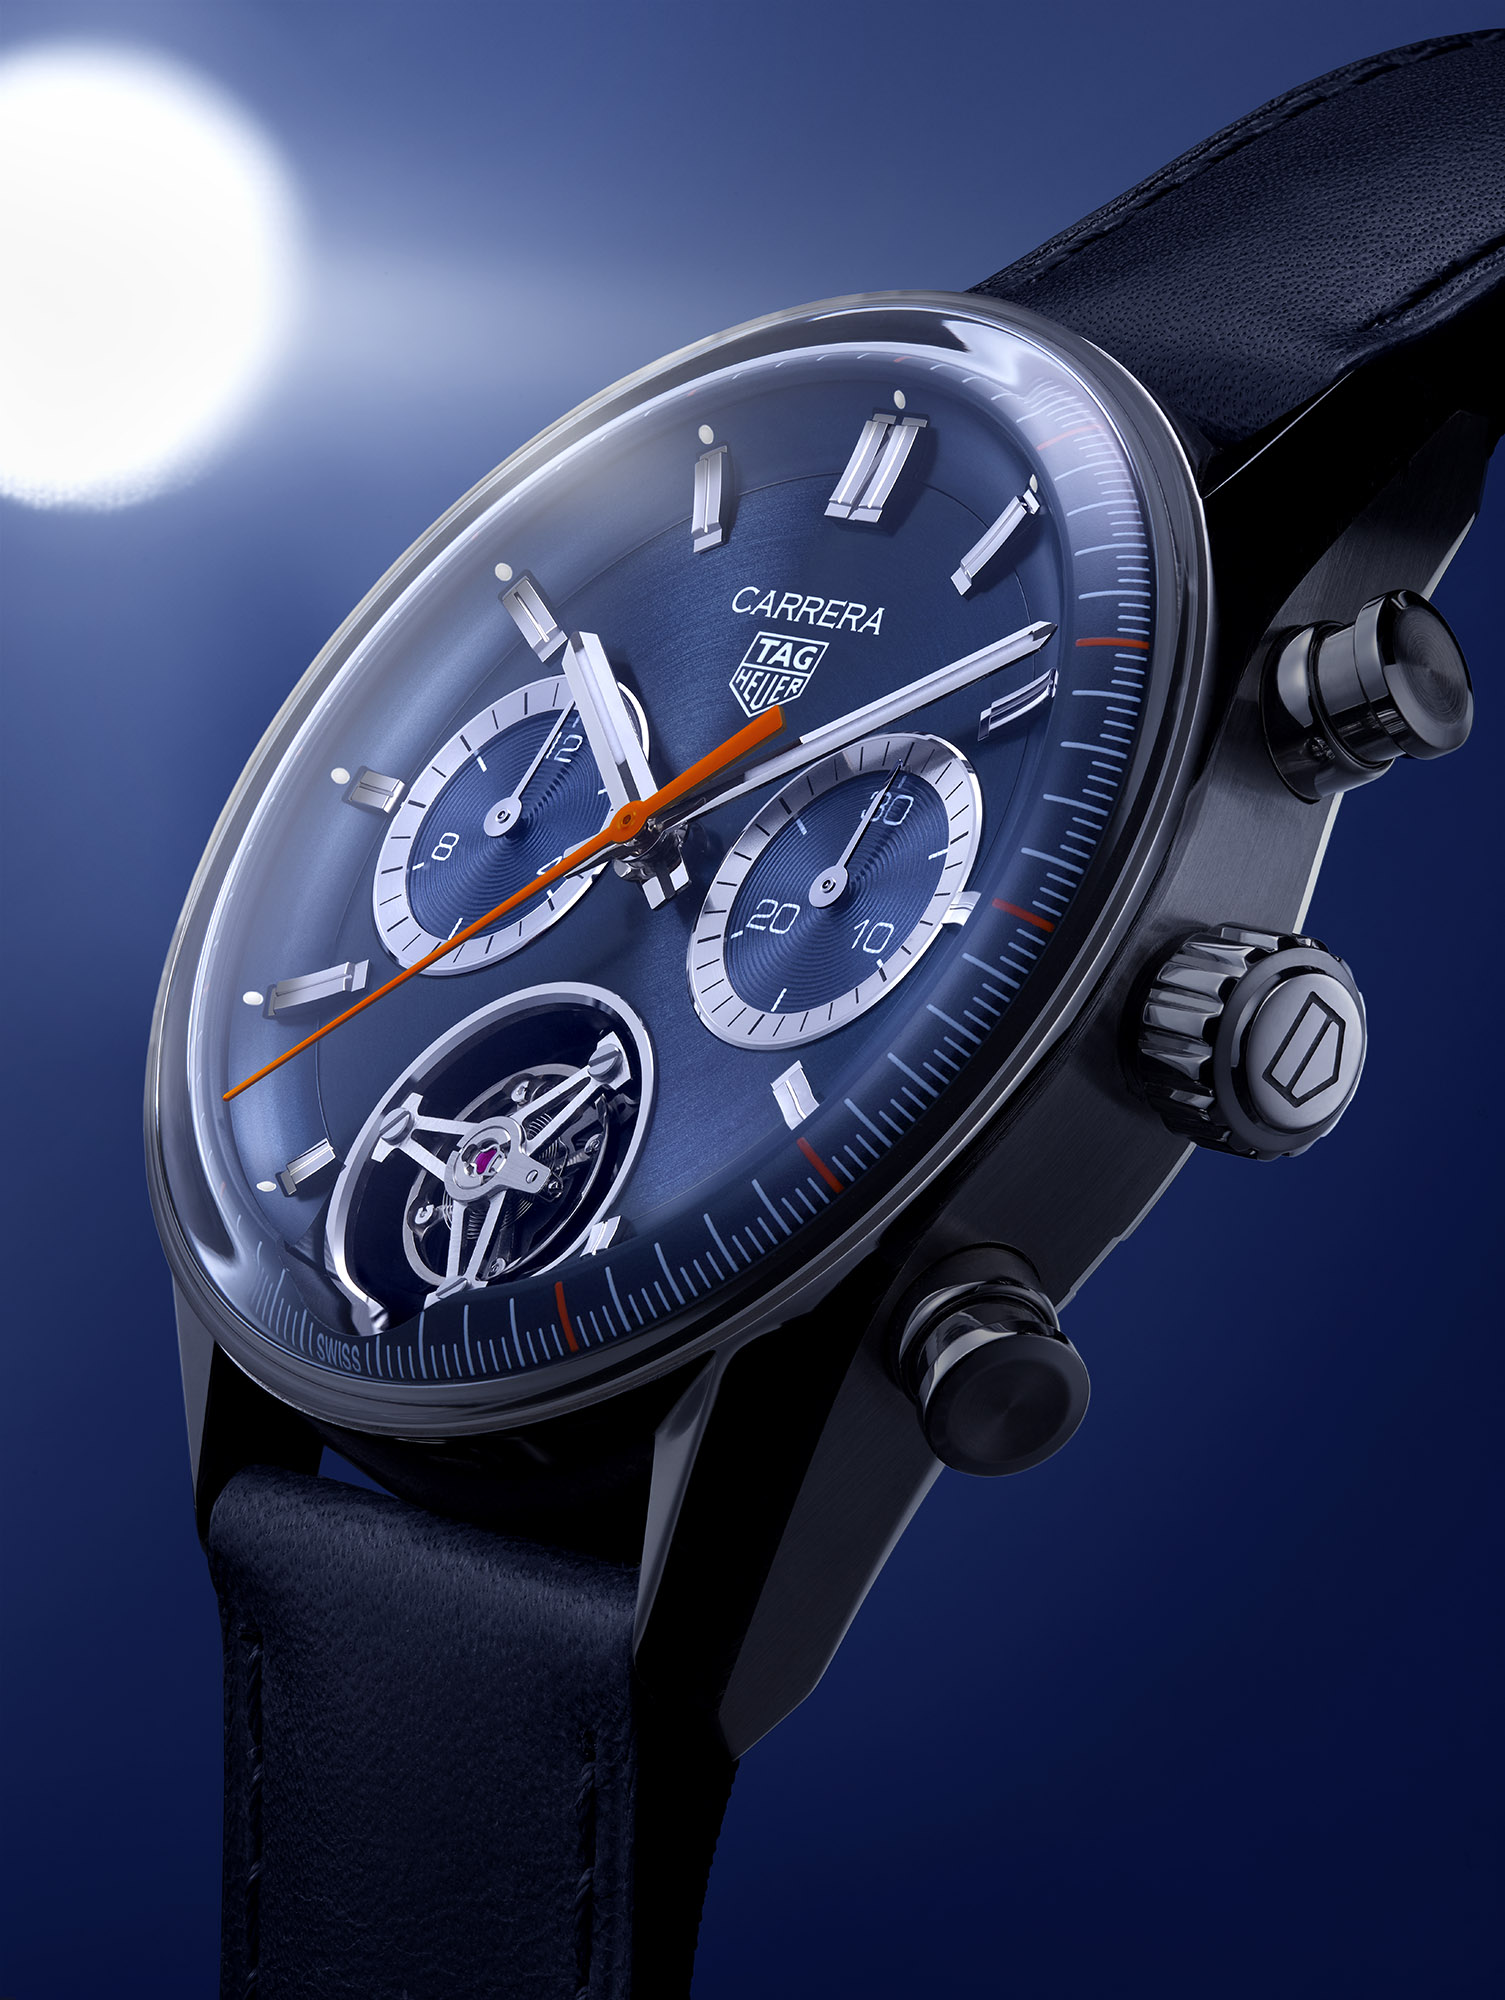 The TAG Heuer Carrera Collection with blue dial is a contemporary